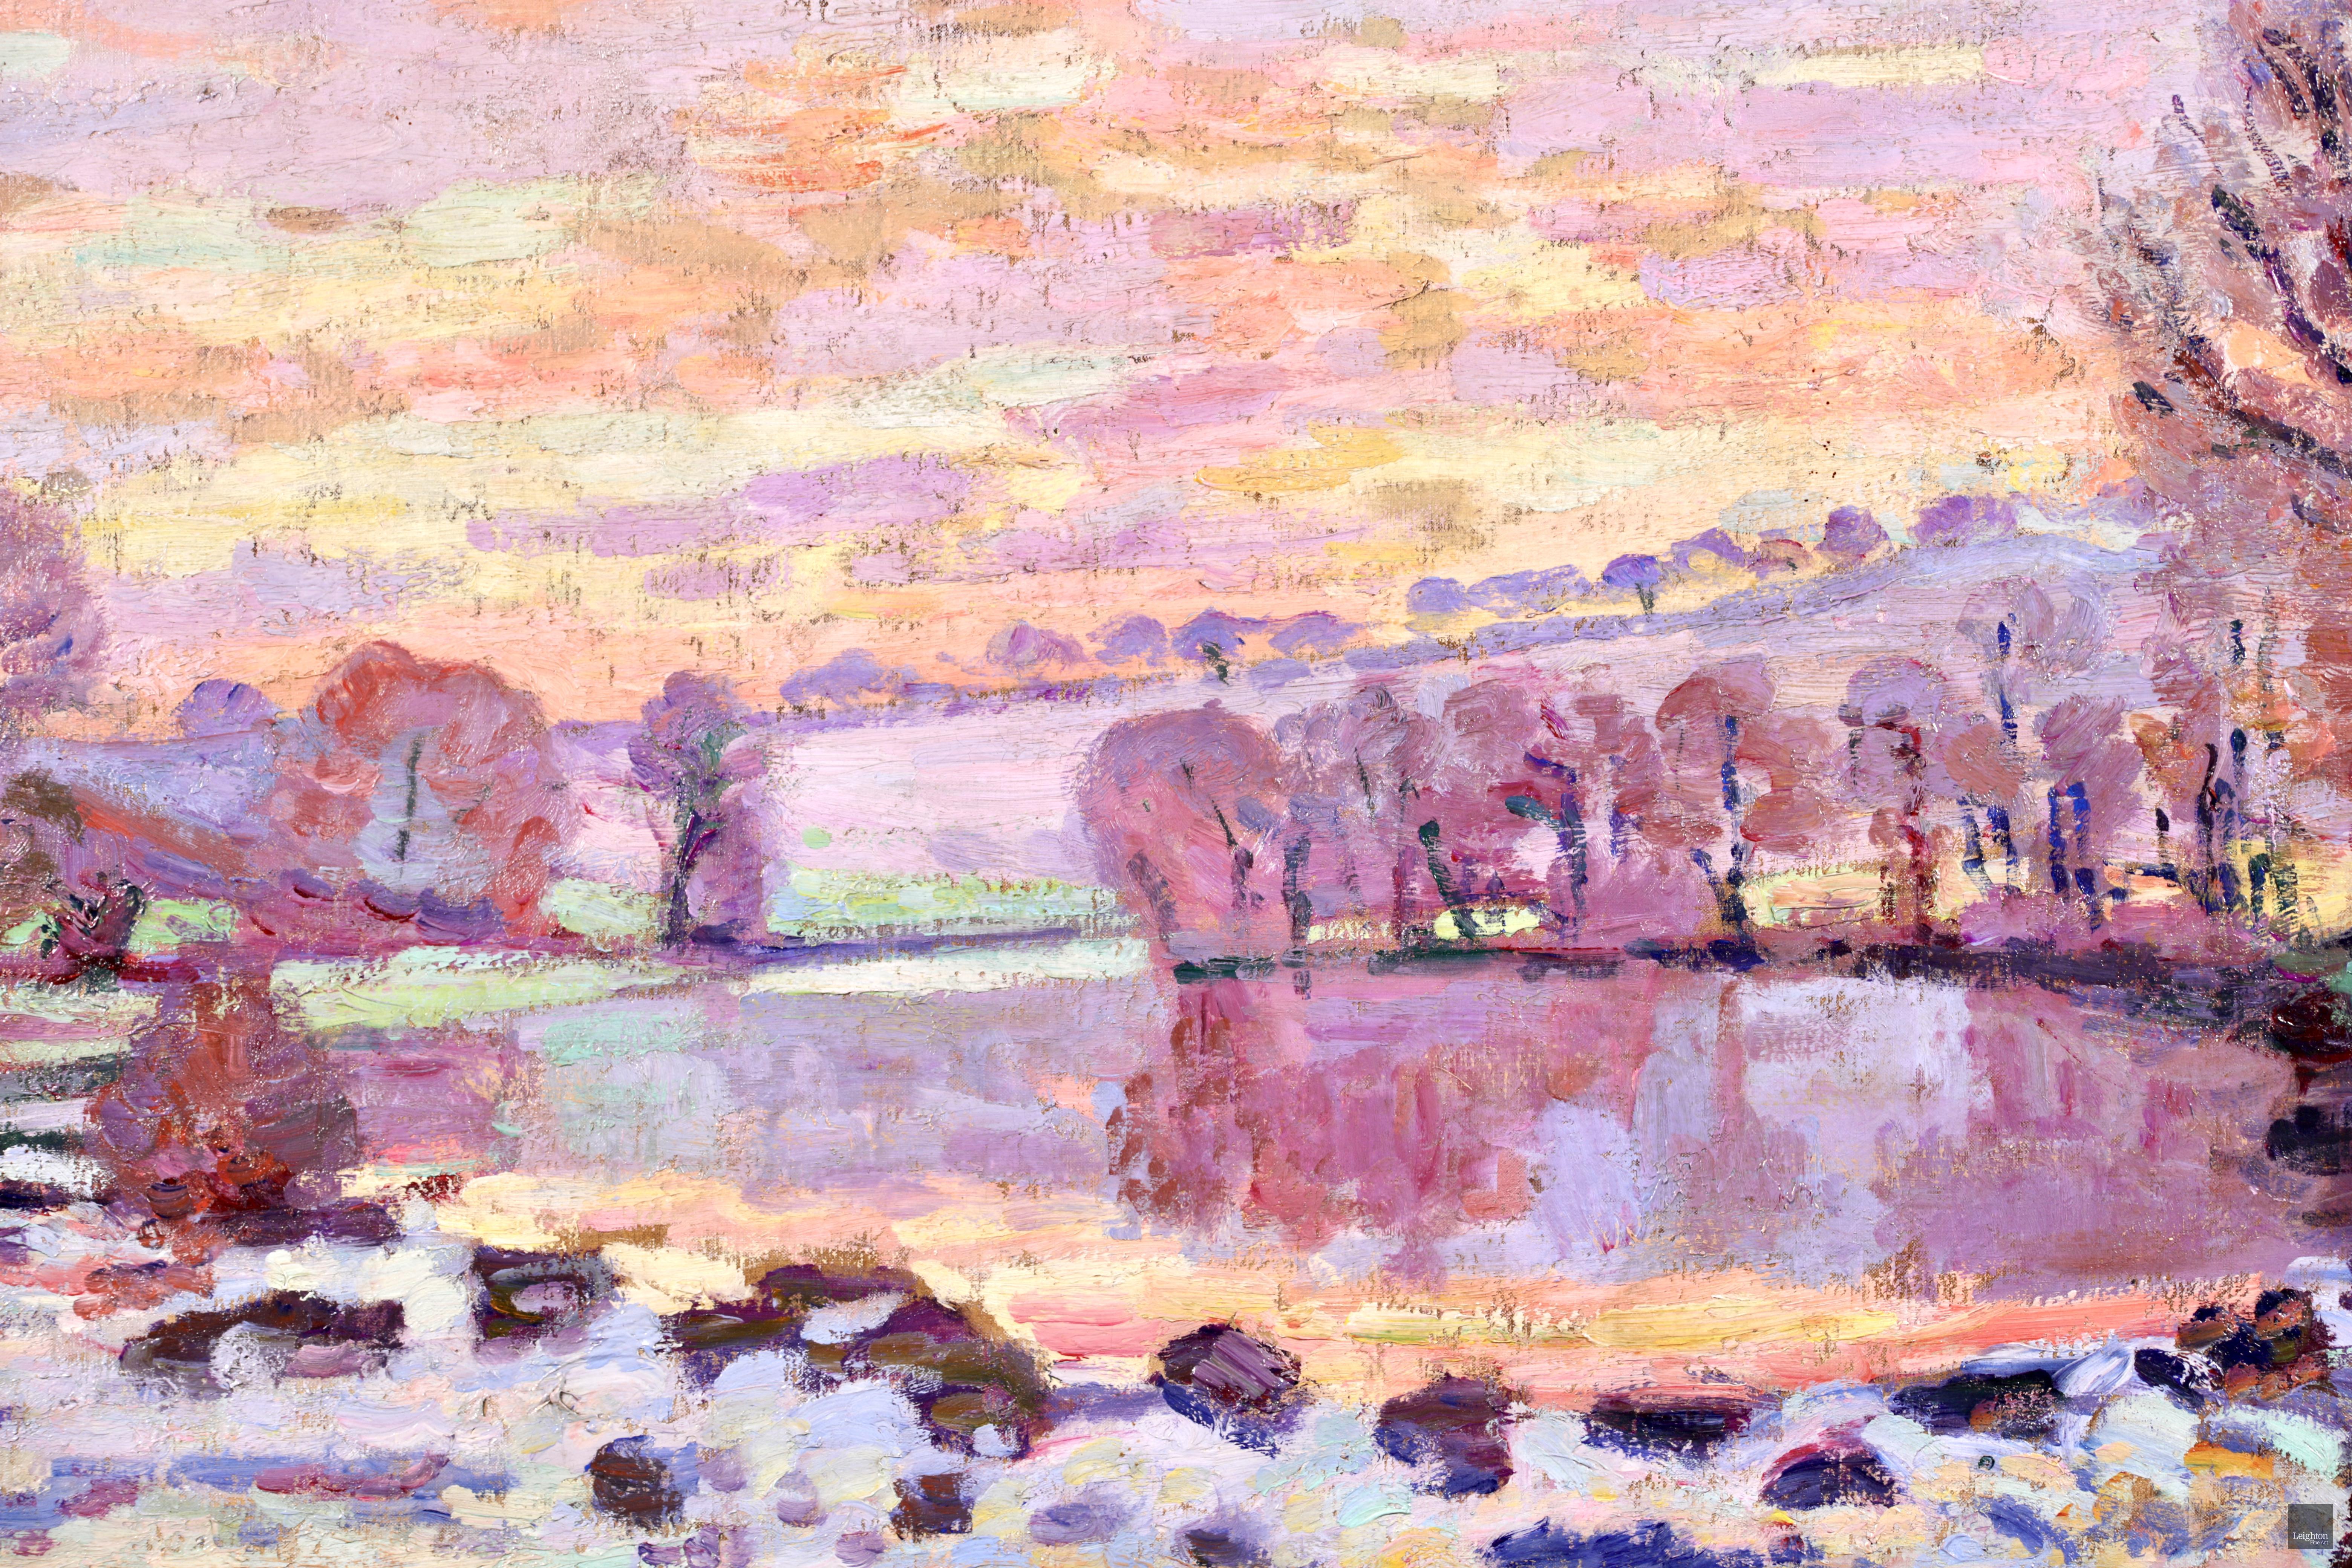 Dam at Genetin - Impressionist Oil, Winter Riverscape by Armand Guillaumin - Brown Landscape Painting by Jean Baptiste-Armand Guillaumin